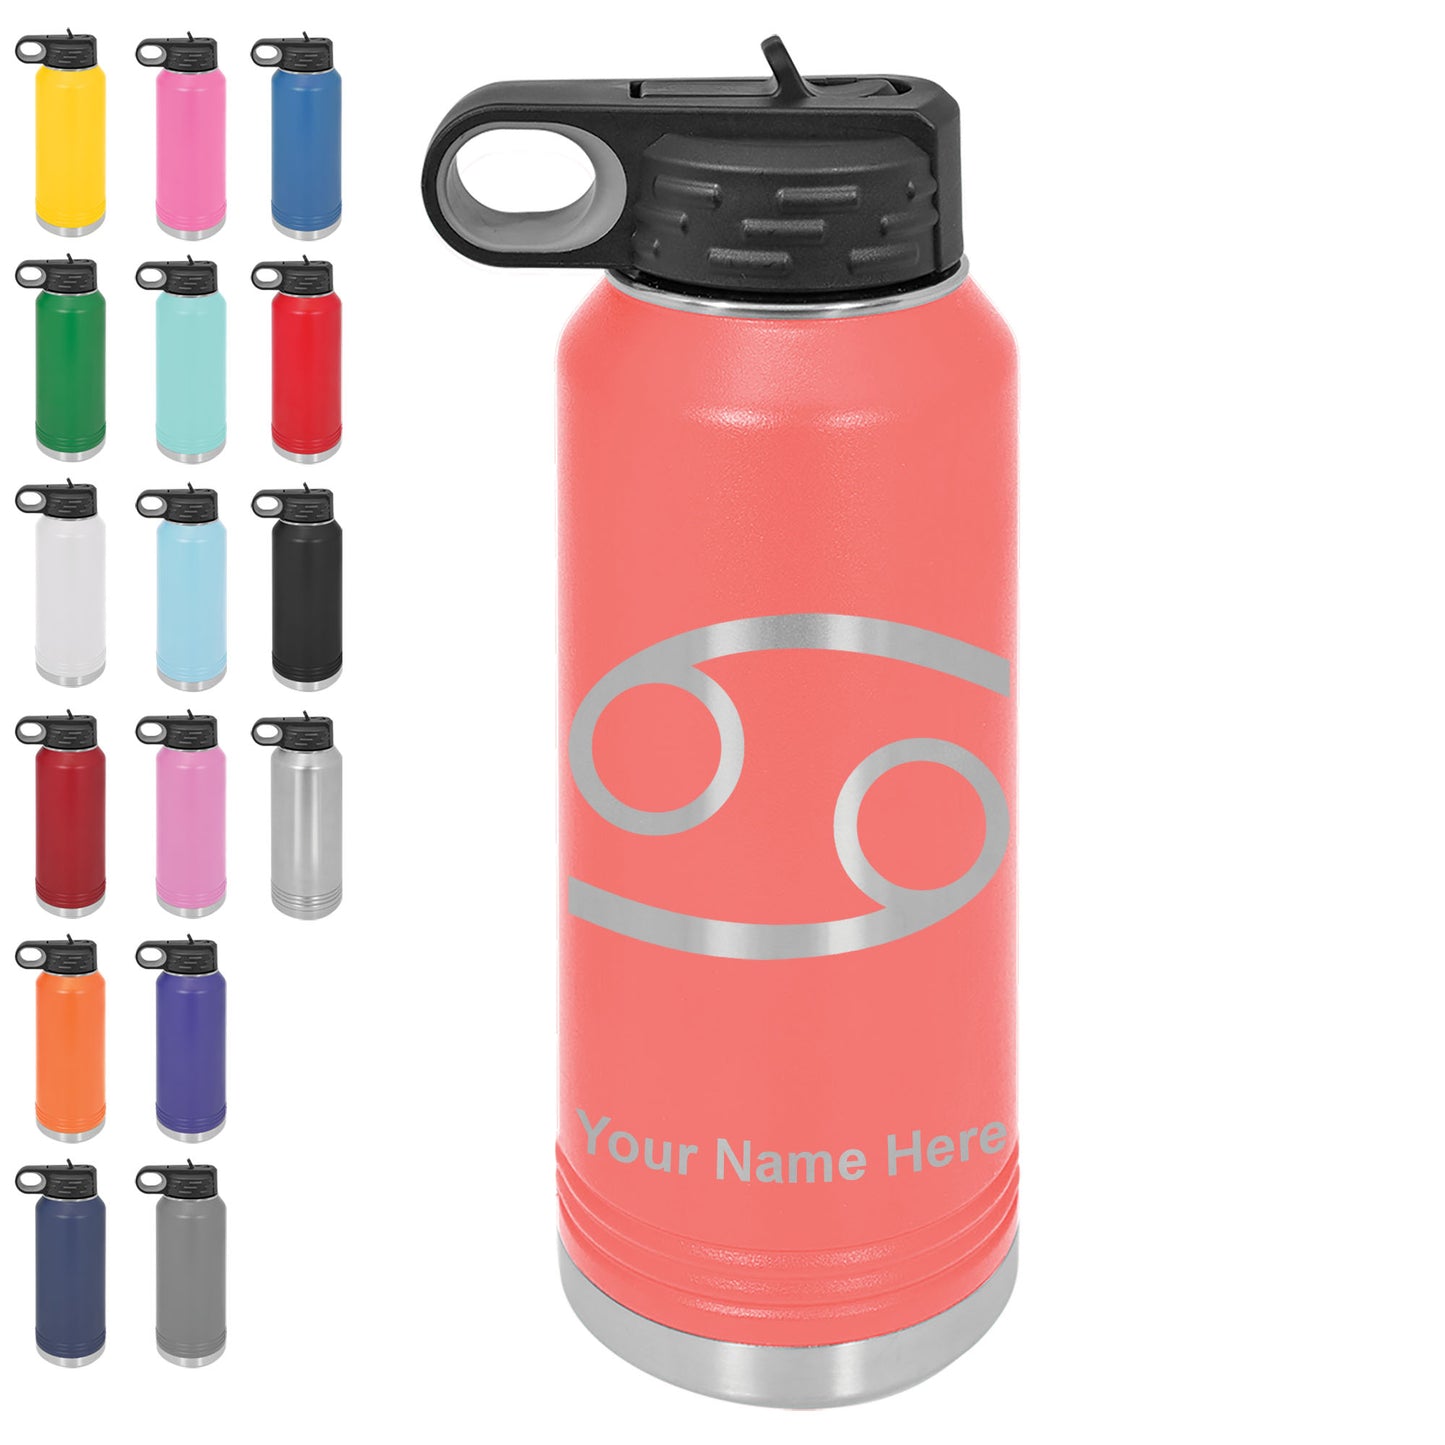 LaserGram 32oz Double Wall Flip Top Water Bottle with Straw, Zodiac Sign Cancer, Personalized Engraving Included